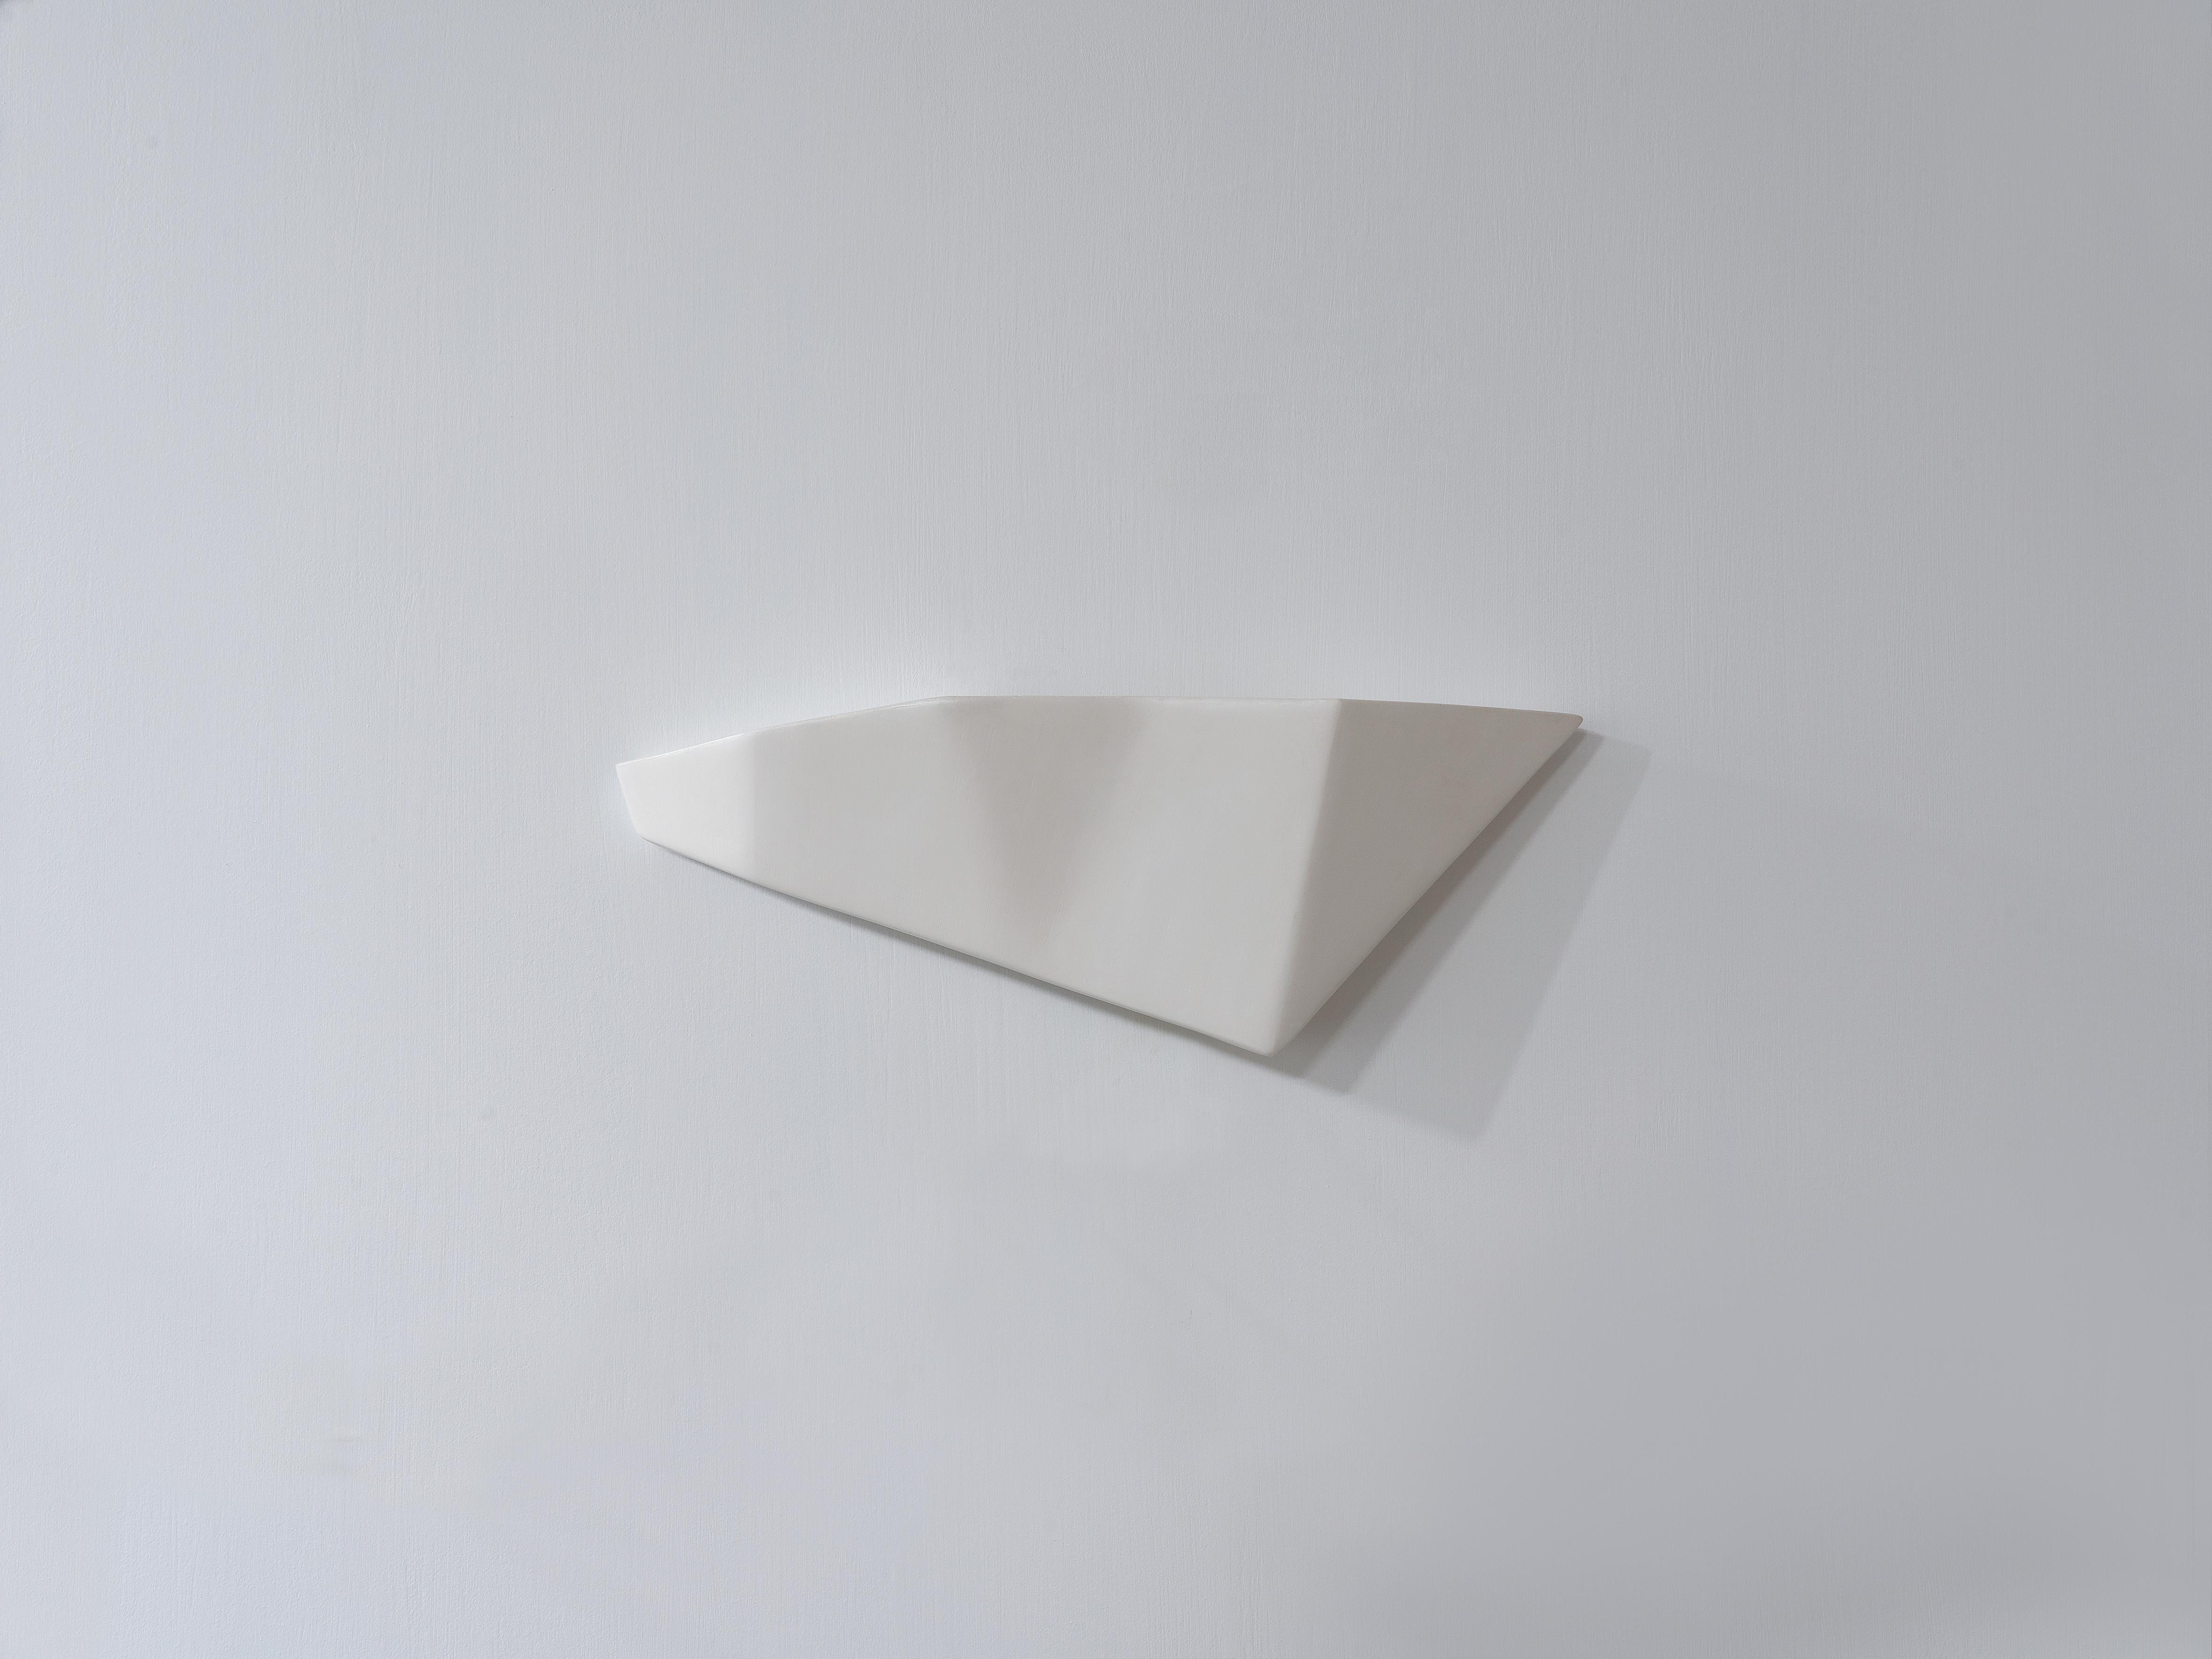 Hand-Crafted Constance Contemporary Wall Sconce, Wall Light in White Plaster Finish, Benediko For Sale